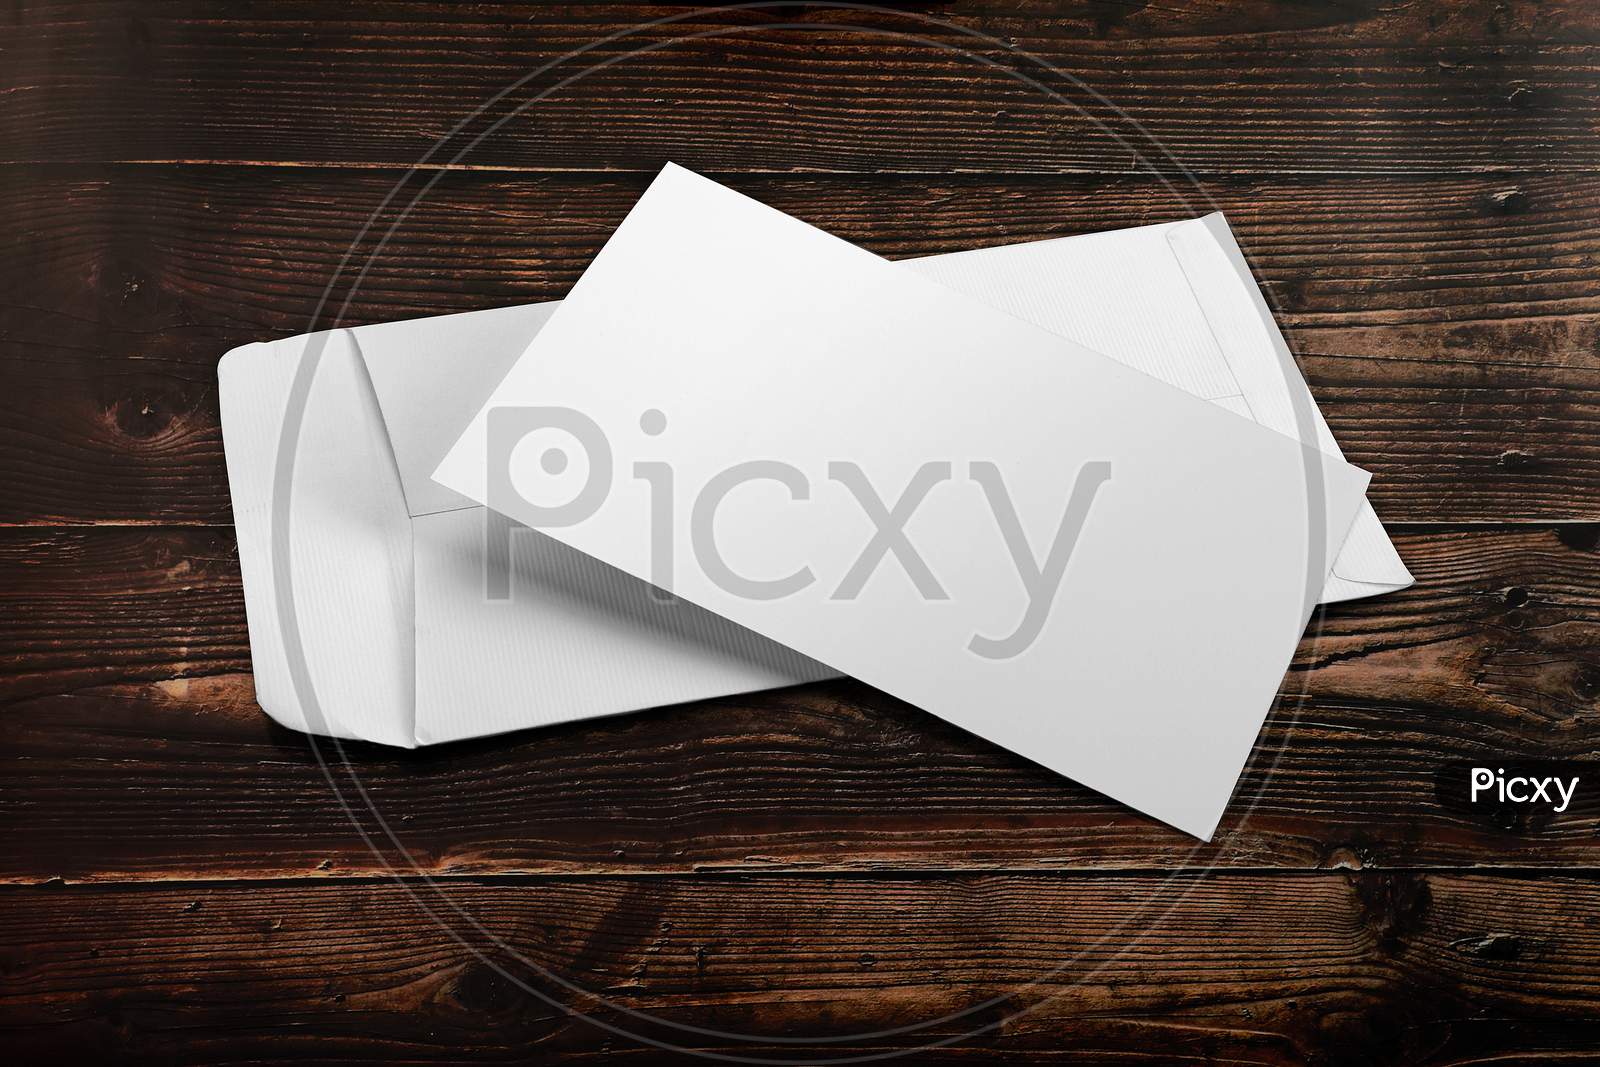 Blank White Envelope Mockup With An Invitation Card On Wooden Background